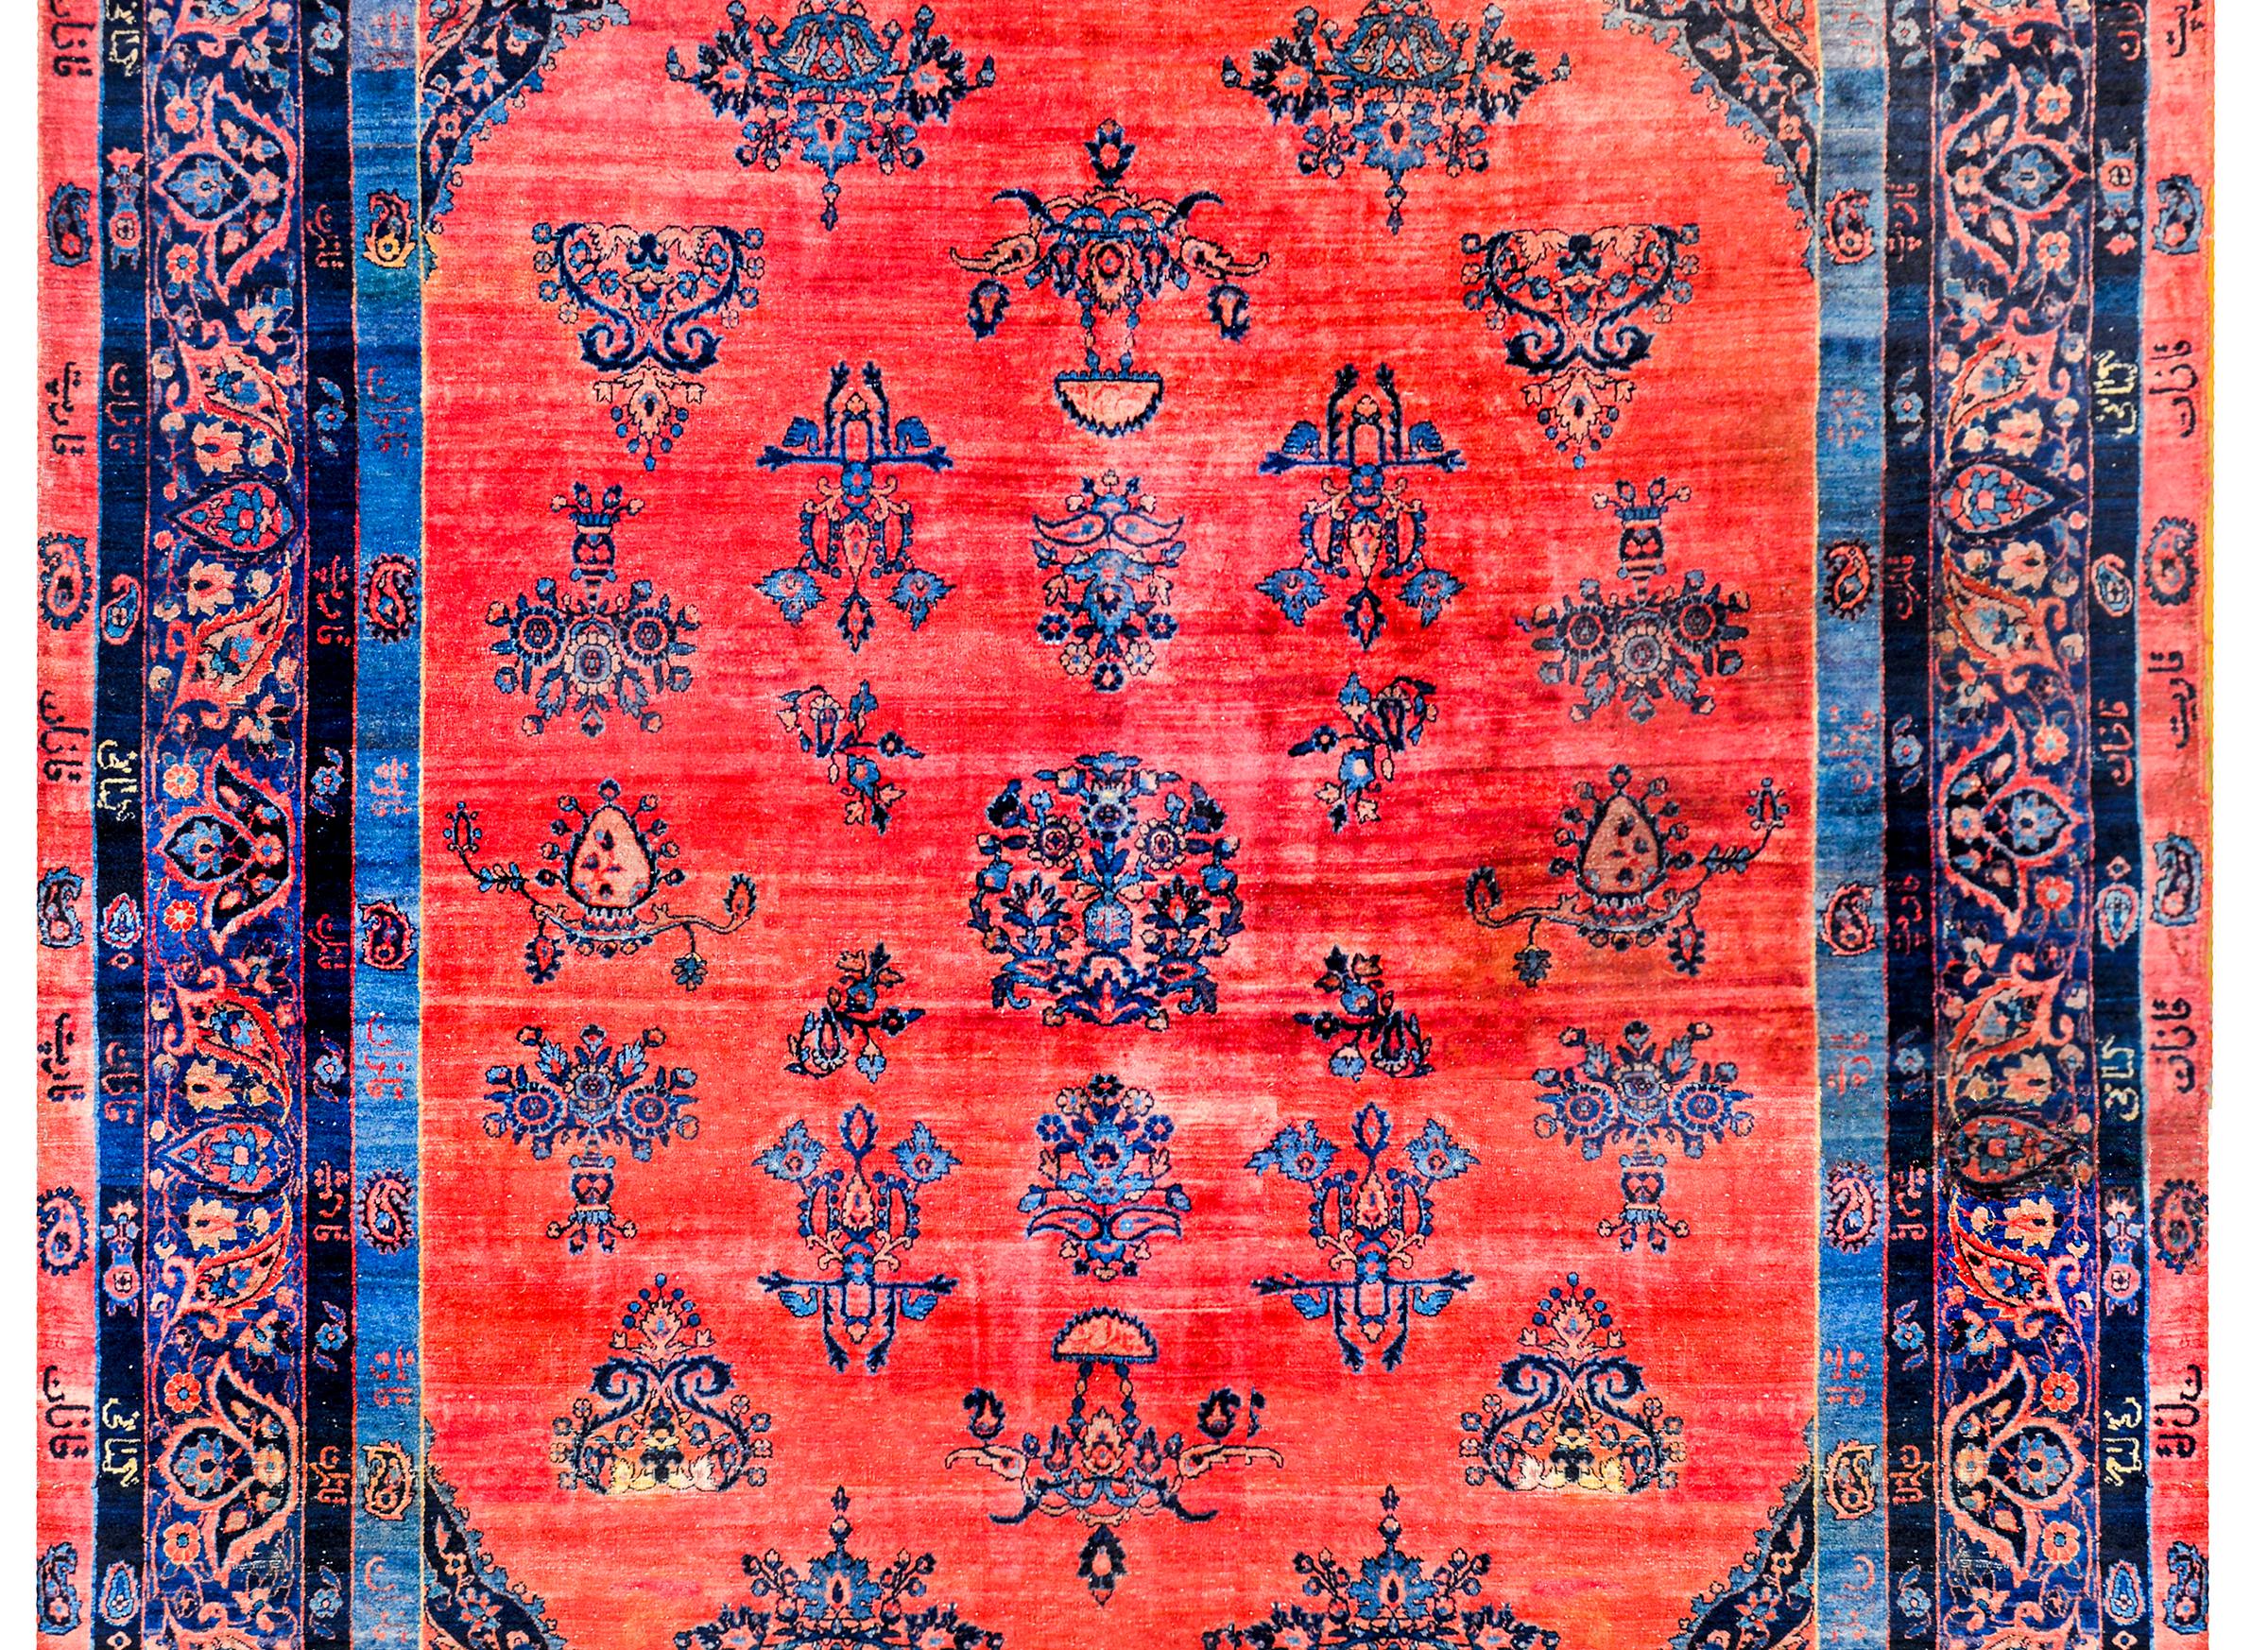 A wonderful early 20th century Persian Kashan rug with a fantastic abrash red field with multiple floral 